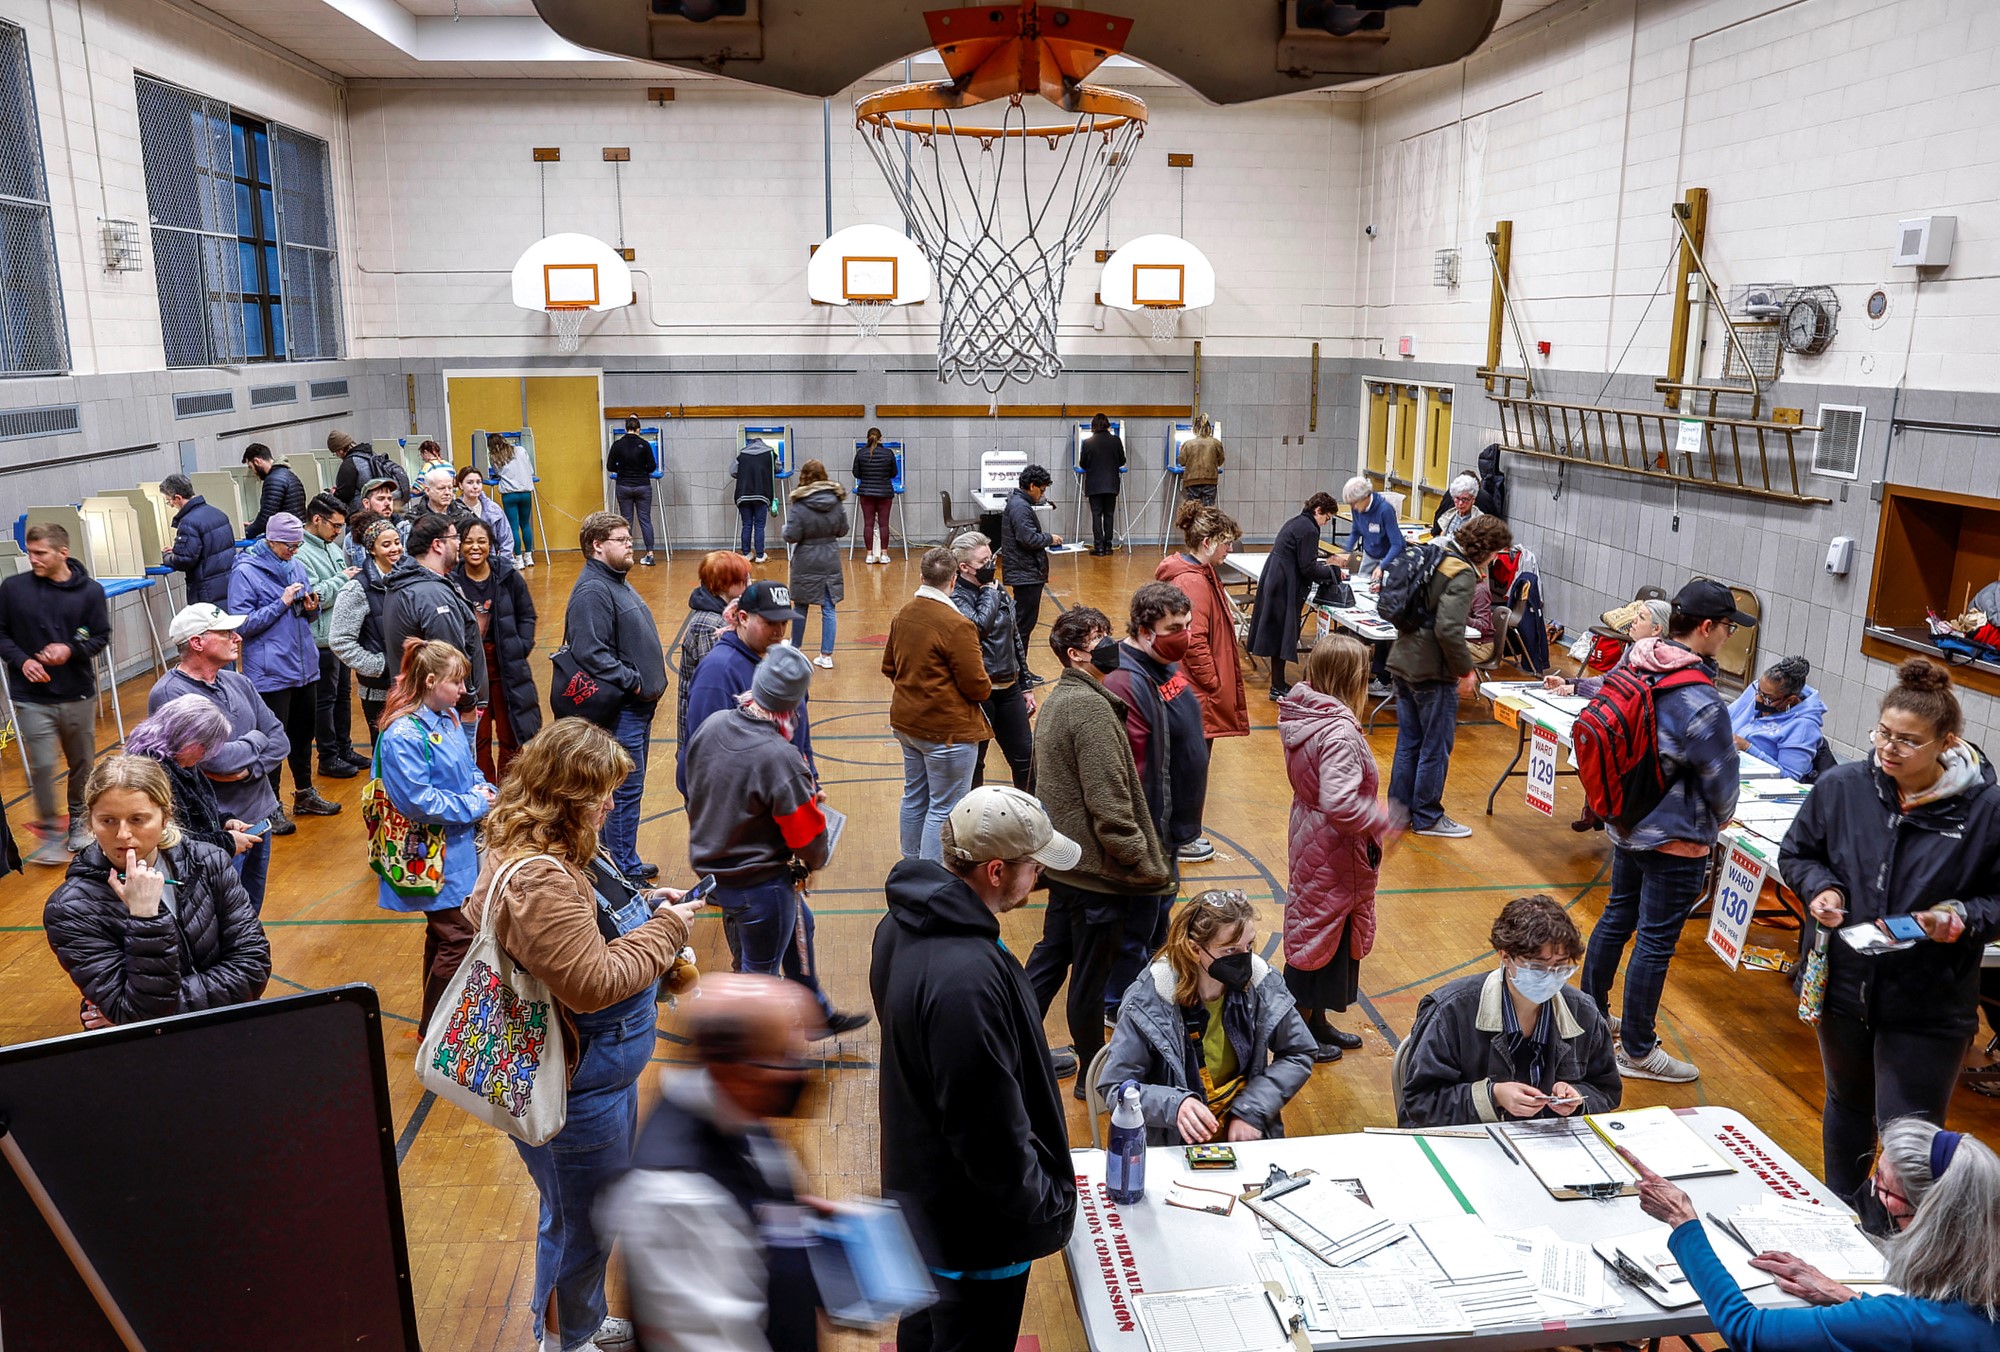 Voters gather in a school gym to cast their vote.